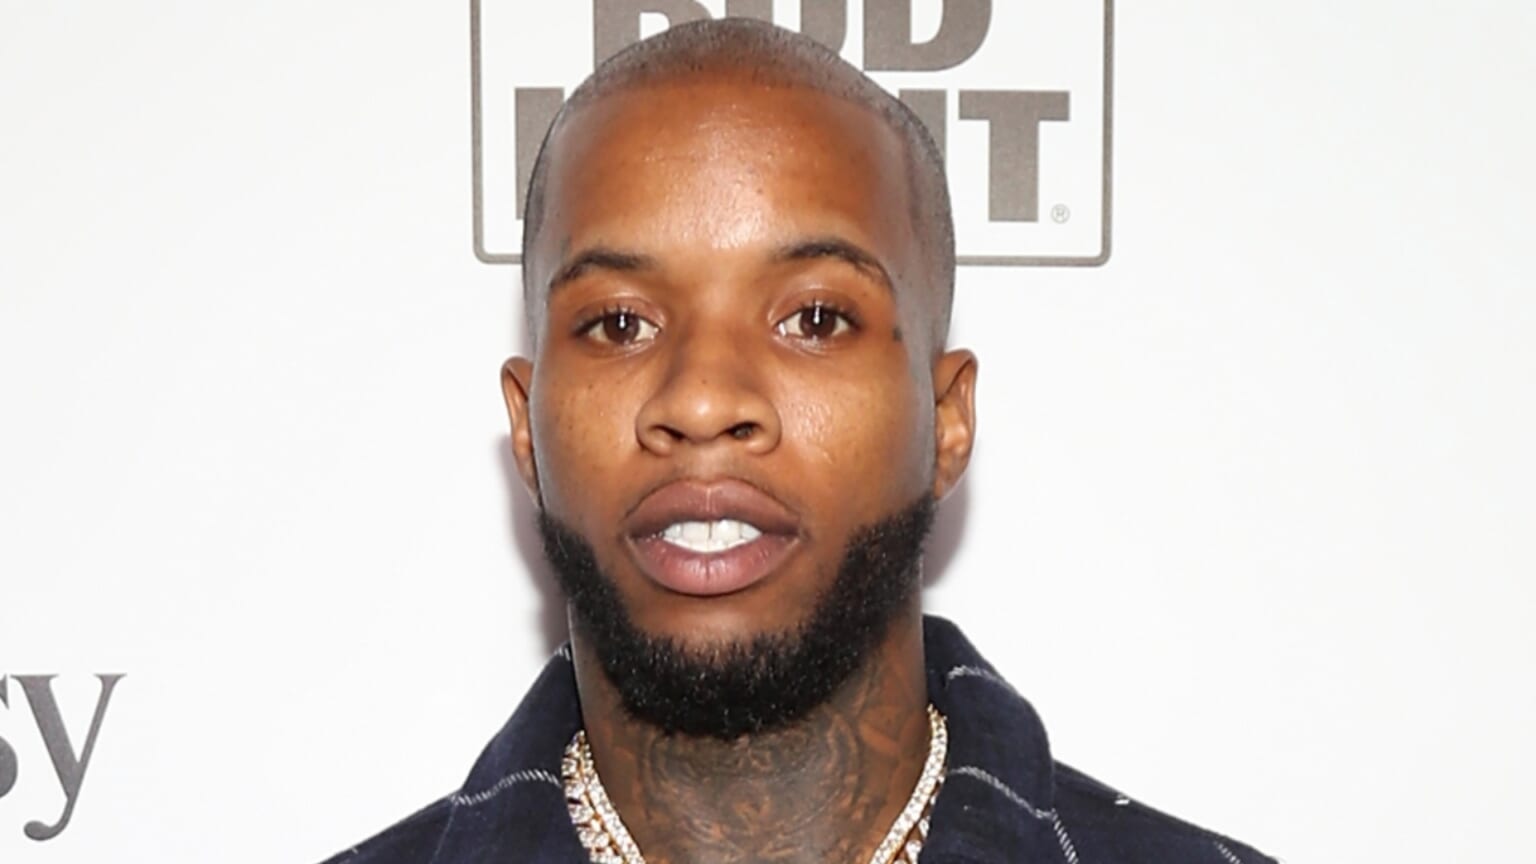 Tory Lanez requests court to allow him to speak on Megan Thee Stallion